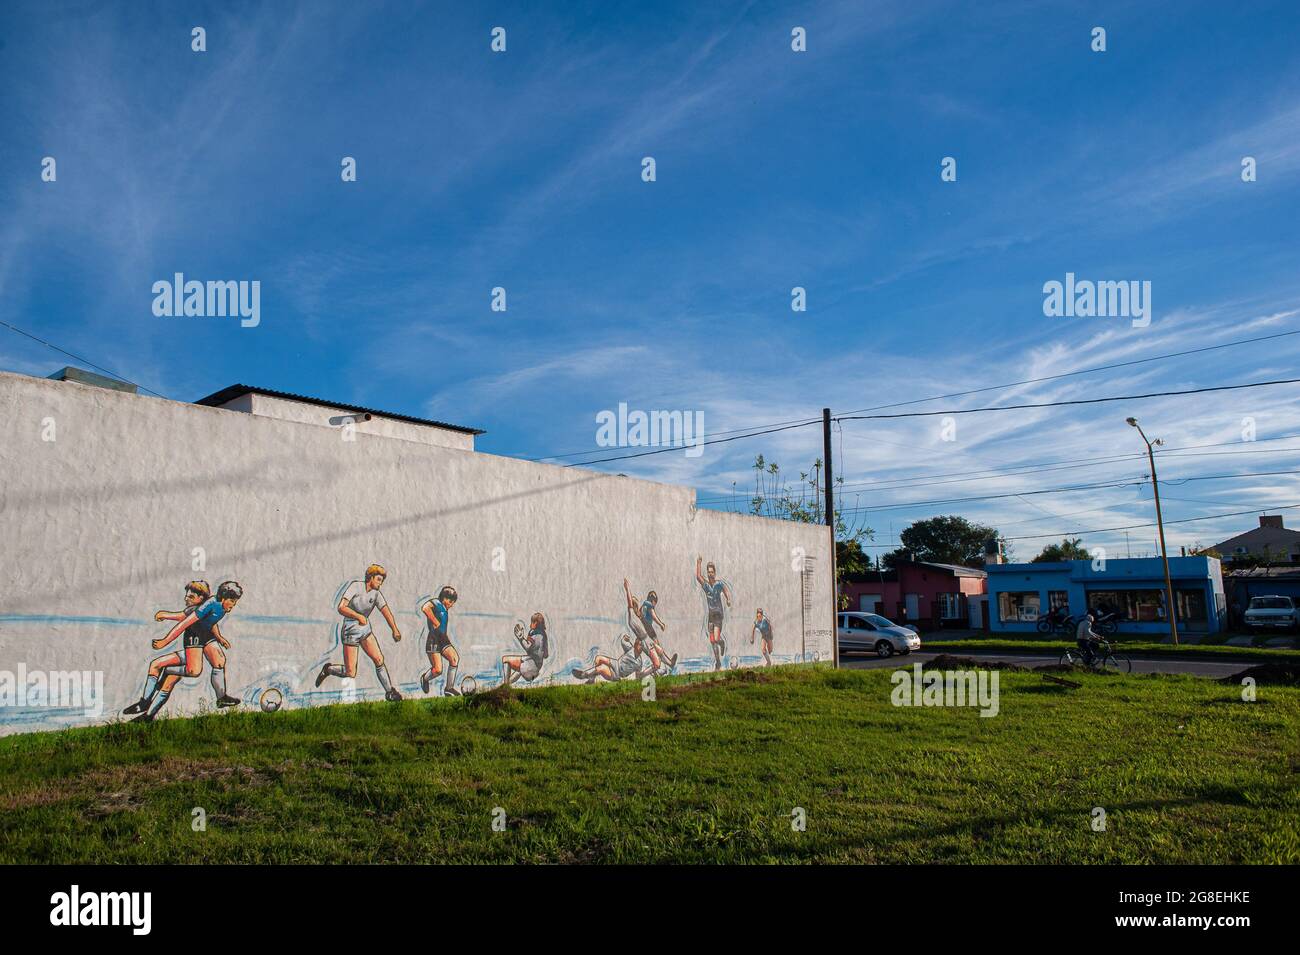 Firmat, Argentina. 12th May, 2018. A mural celebrating the figure of the late football legend Diego Armando Maradona is seen in Firmat. The mural by artist Ariel Bertolotti depicts the legendary goal against the English team in Mexico 86 World Cup, with a twist: the goal isn't celebrated by Maradona but by today's star Lionel Messi. Maradona died at the age of 60 on November 25, 2020 of severe heart failure in circumstances that are still under investigation. (Photo by Patricio Murphy/SOPA Images/Sipa USA) Credit: Sipa USA/Alamy Live News Stock Photo